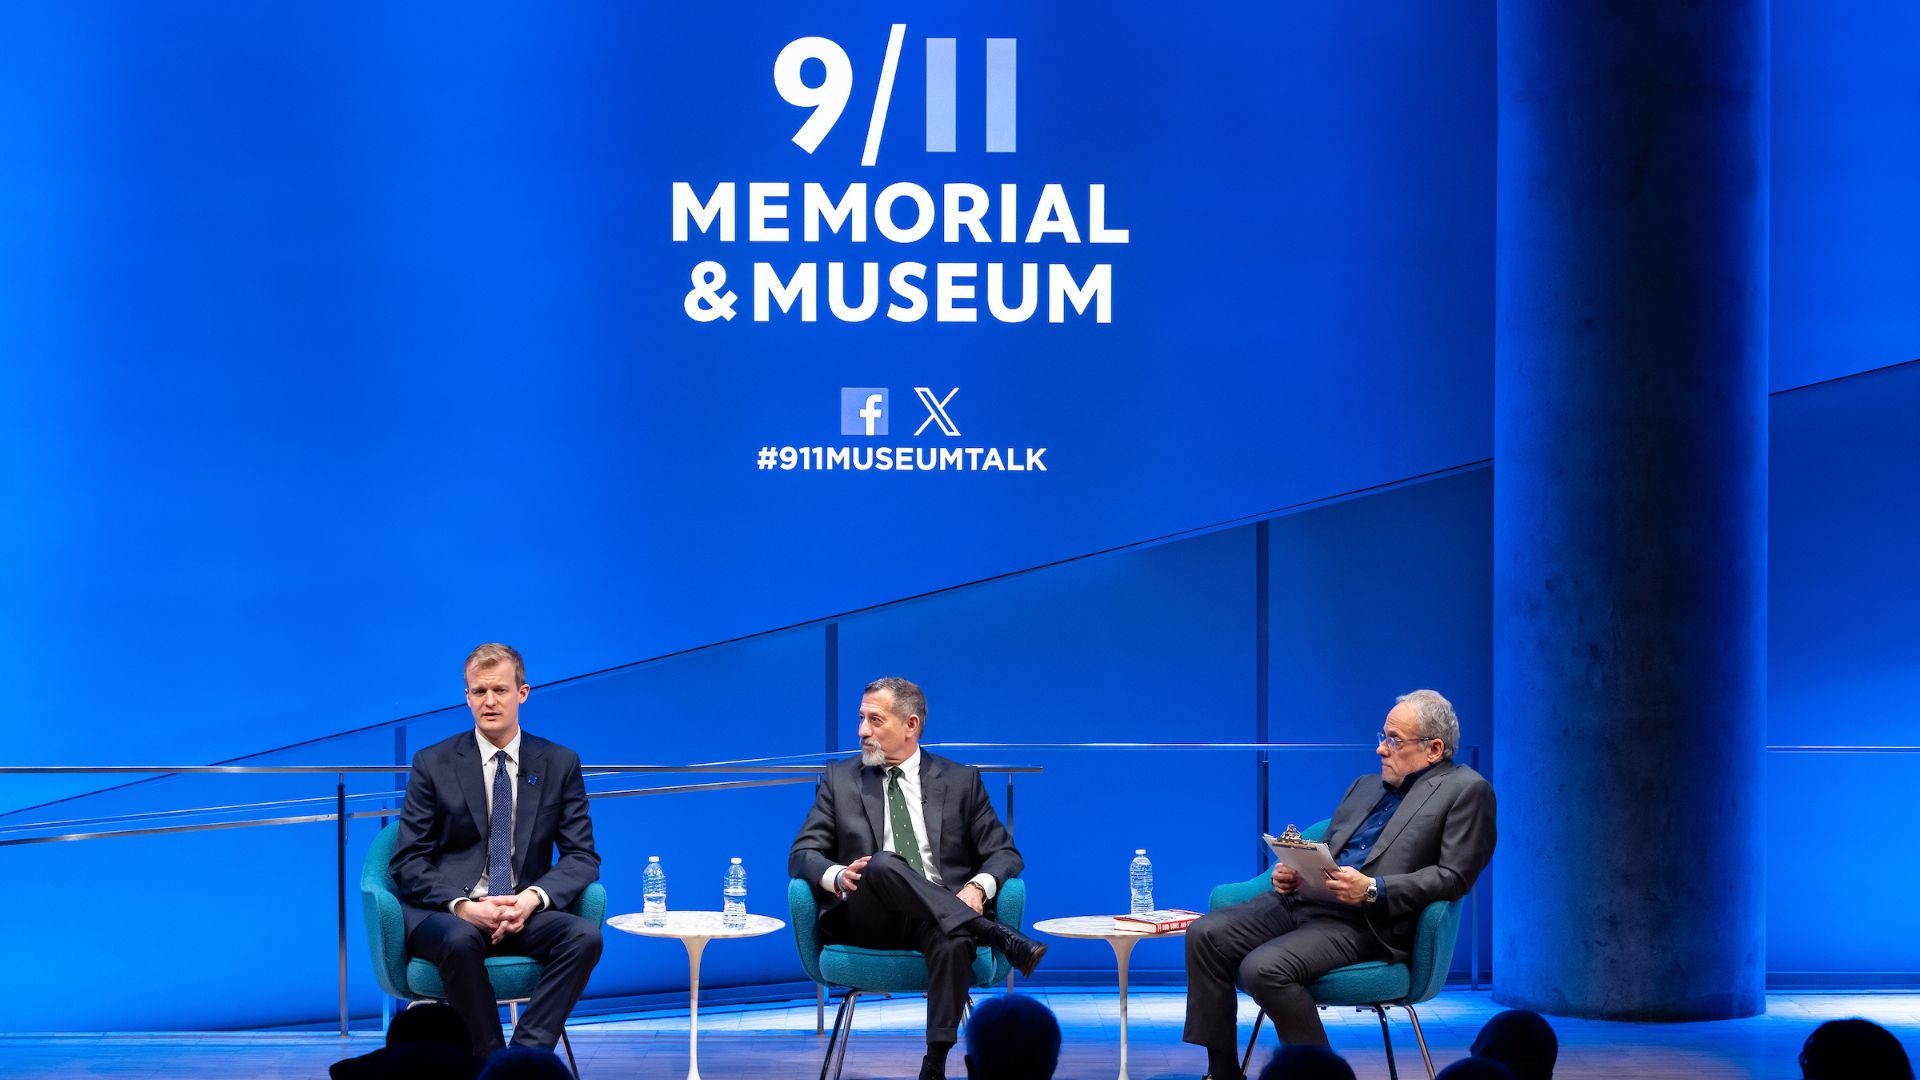 Three men on stage, all wearing dark suits, against a blue background displaying the 9/11 Memorial and Museum logo.